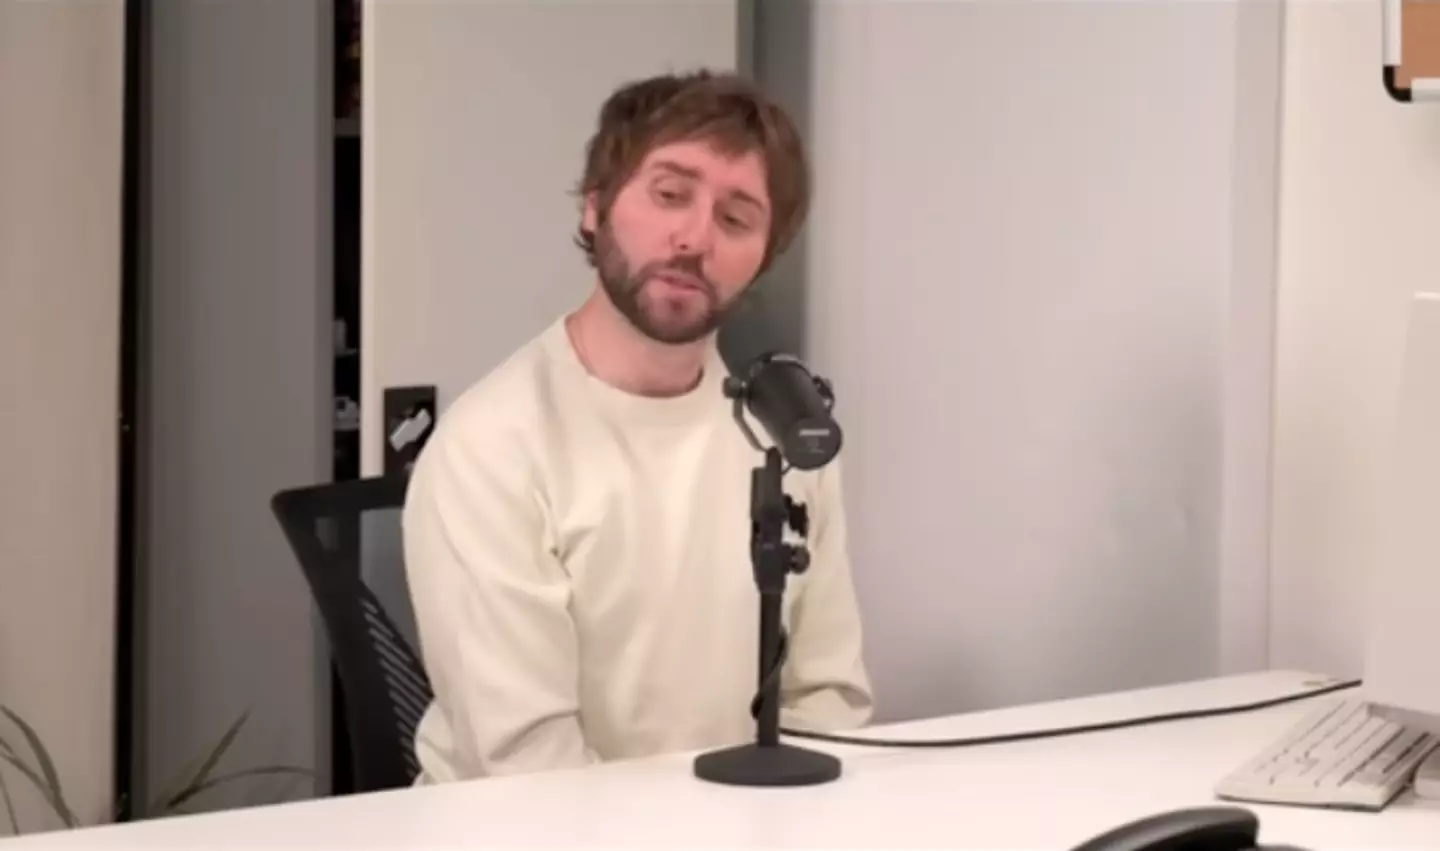 James Buckley said he was ‘furious’ about being asked to do the joke at the time.